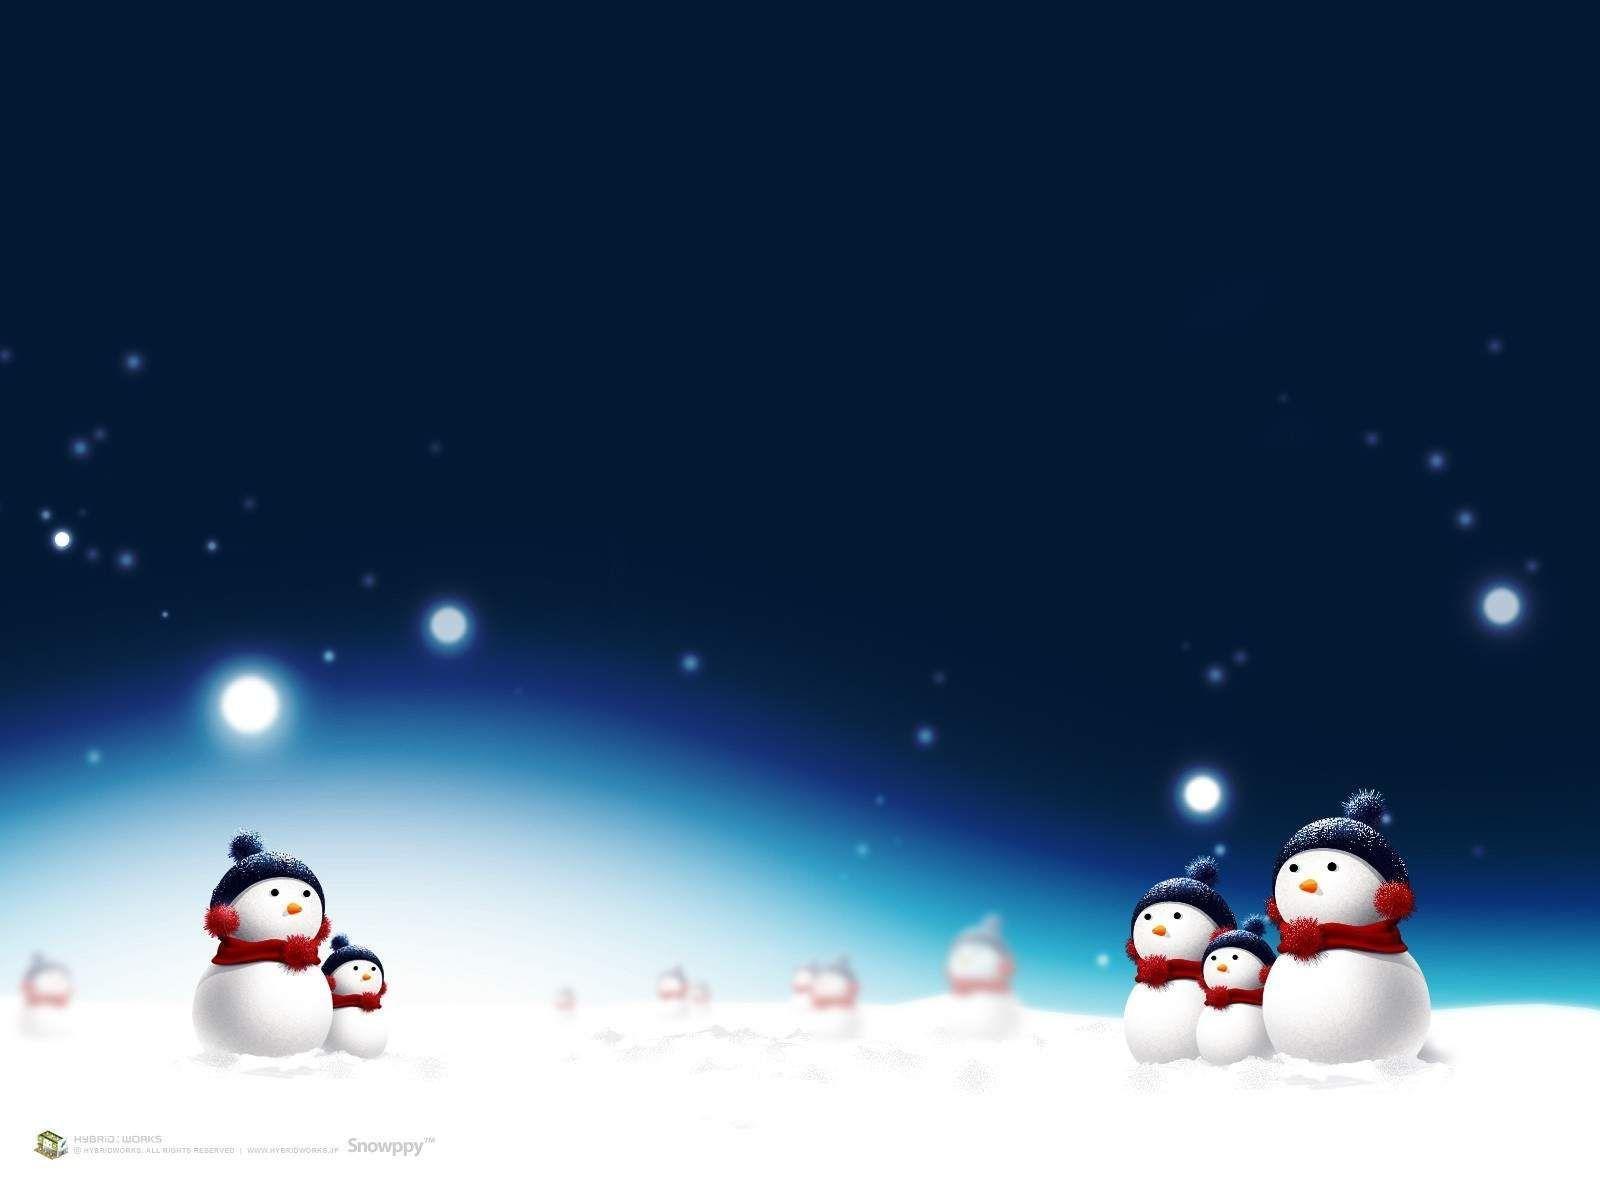 Animated Christmas Desktop Background 1920x1080px high quality